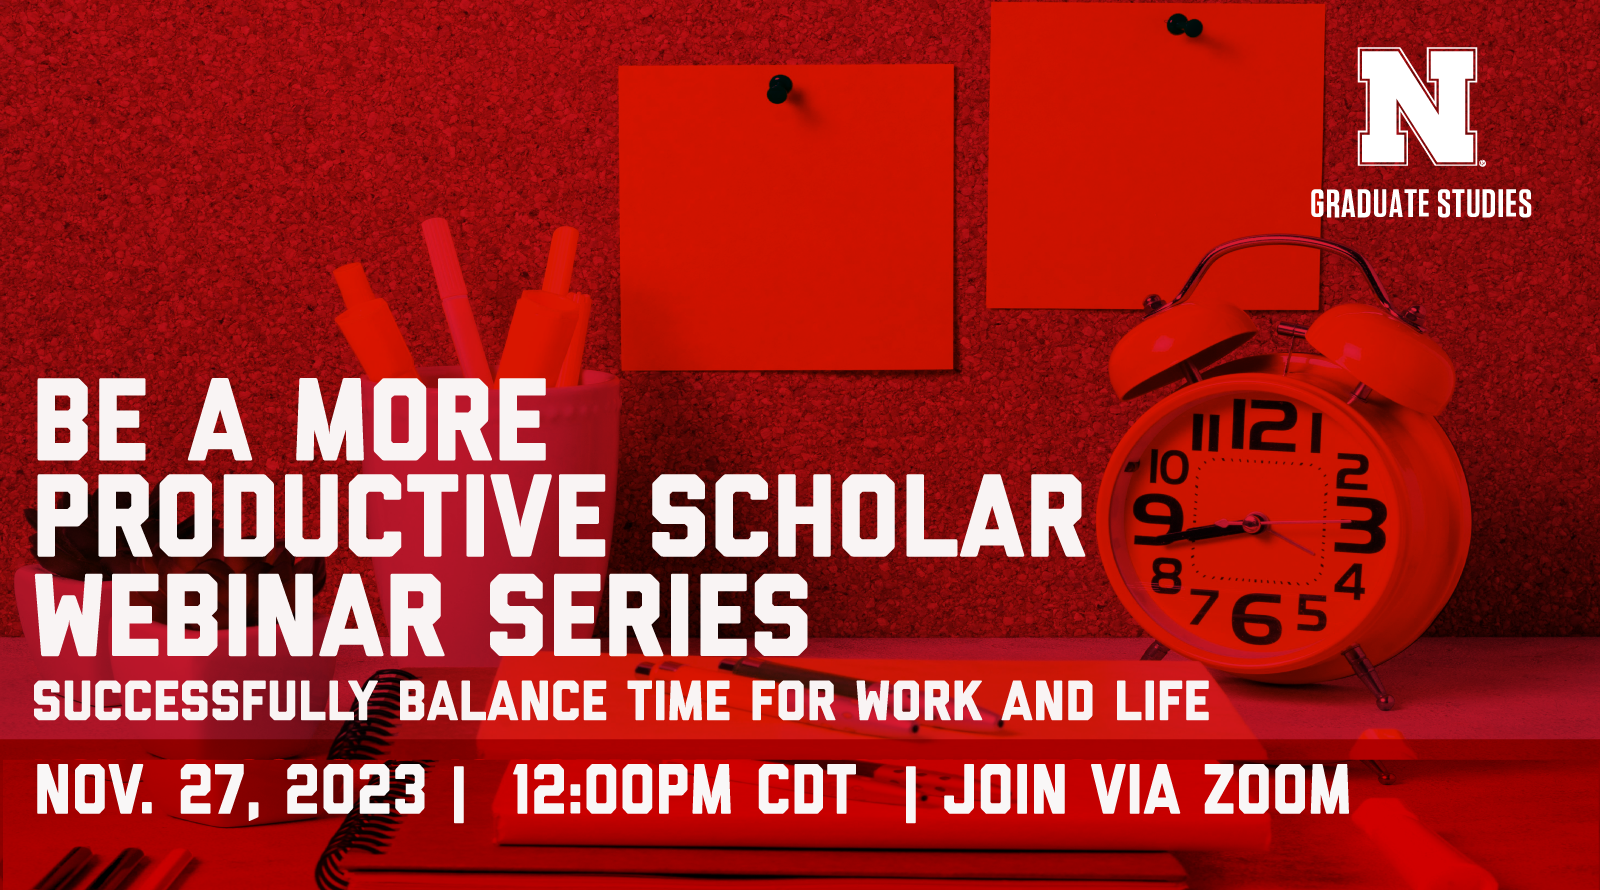 Be a More Productive Scholar Series on How to Successfully balance time for work and life on Monday Nov. 27, 2023 at 12:00PM CDT via Zoom.